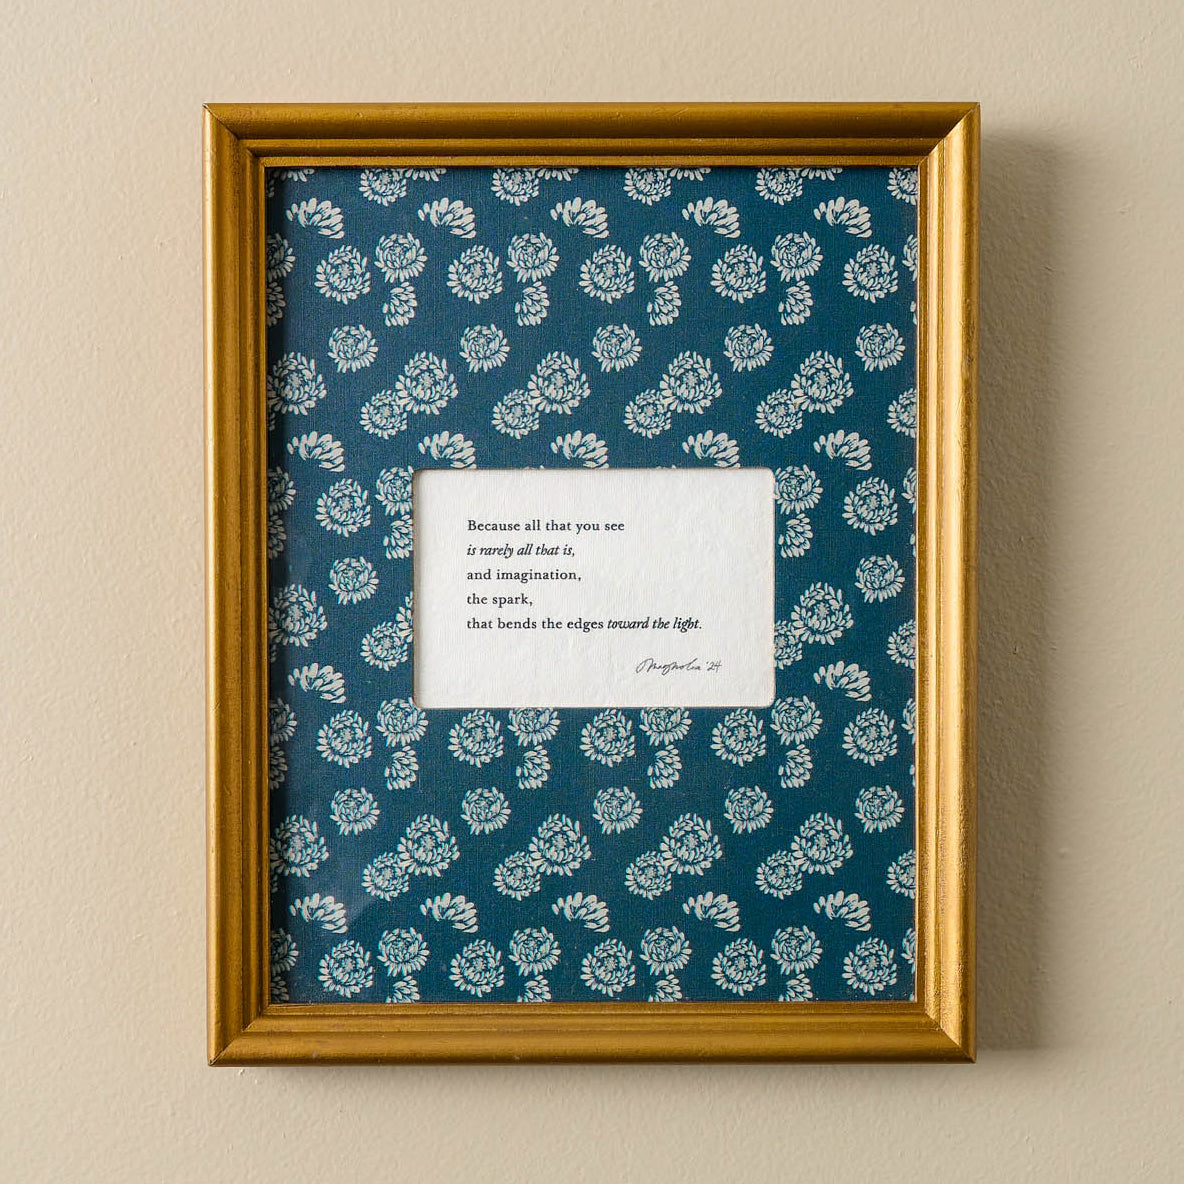 All That Is Framed Poem $34.00